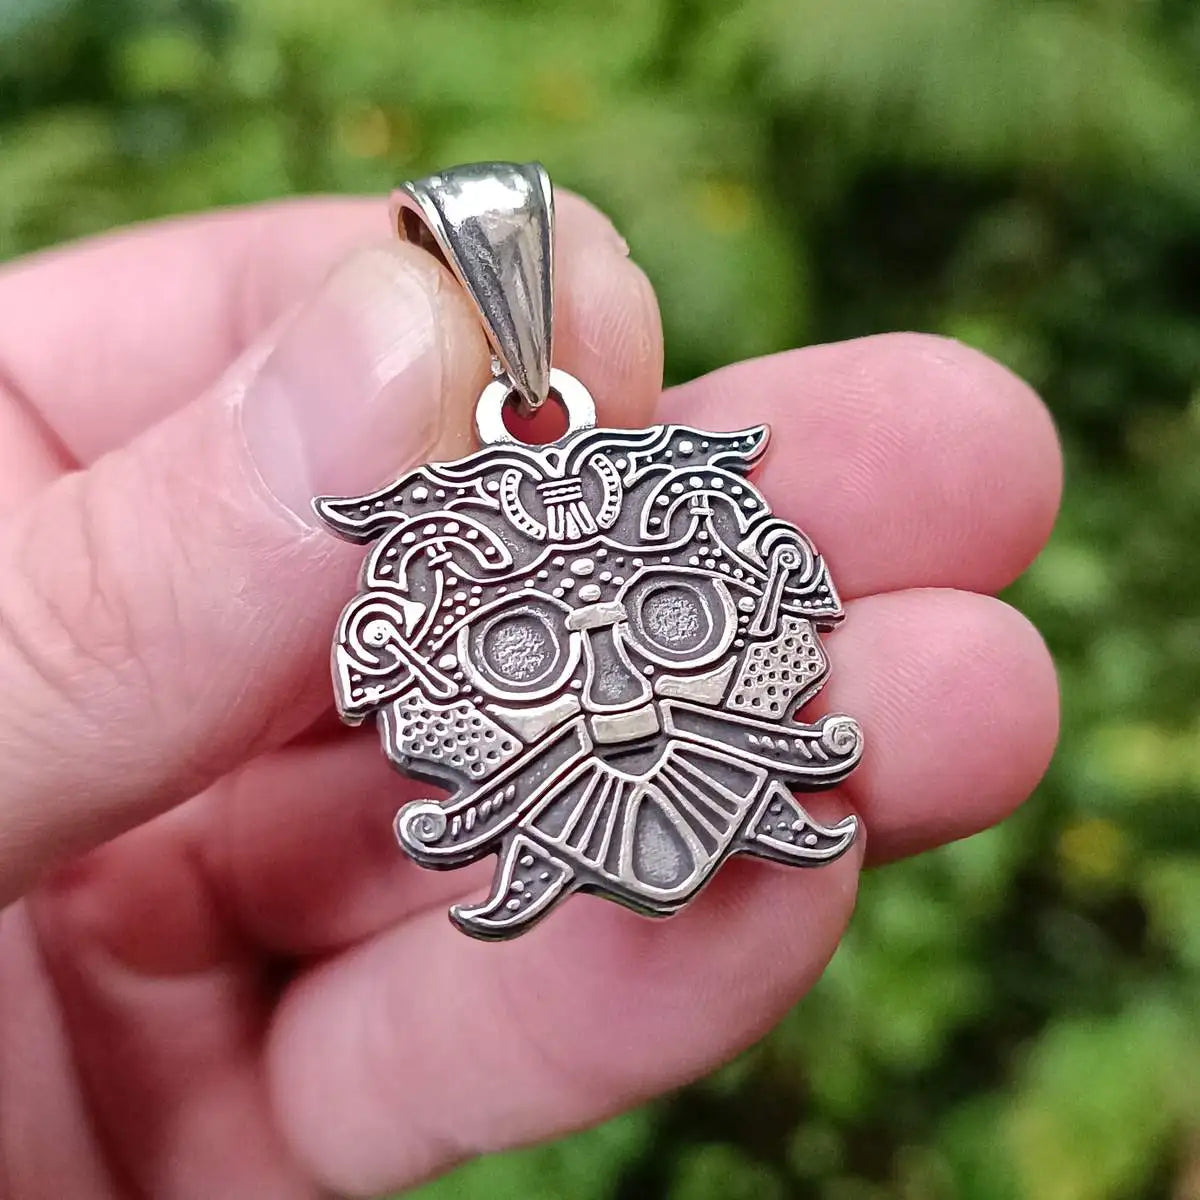 Loki mask pendant from silver